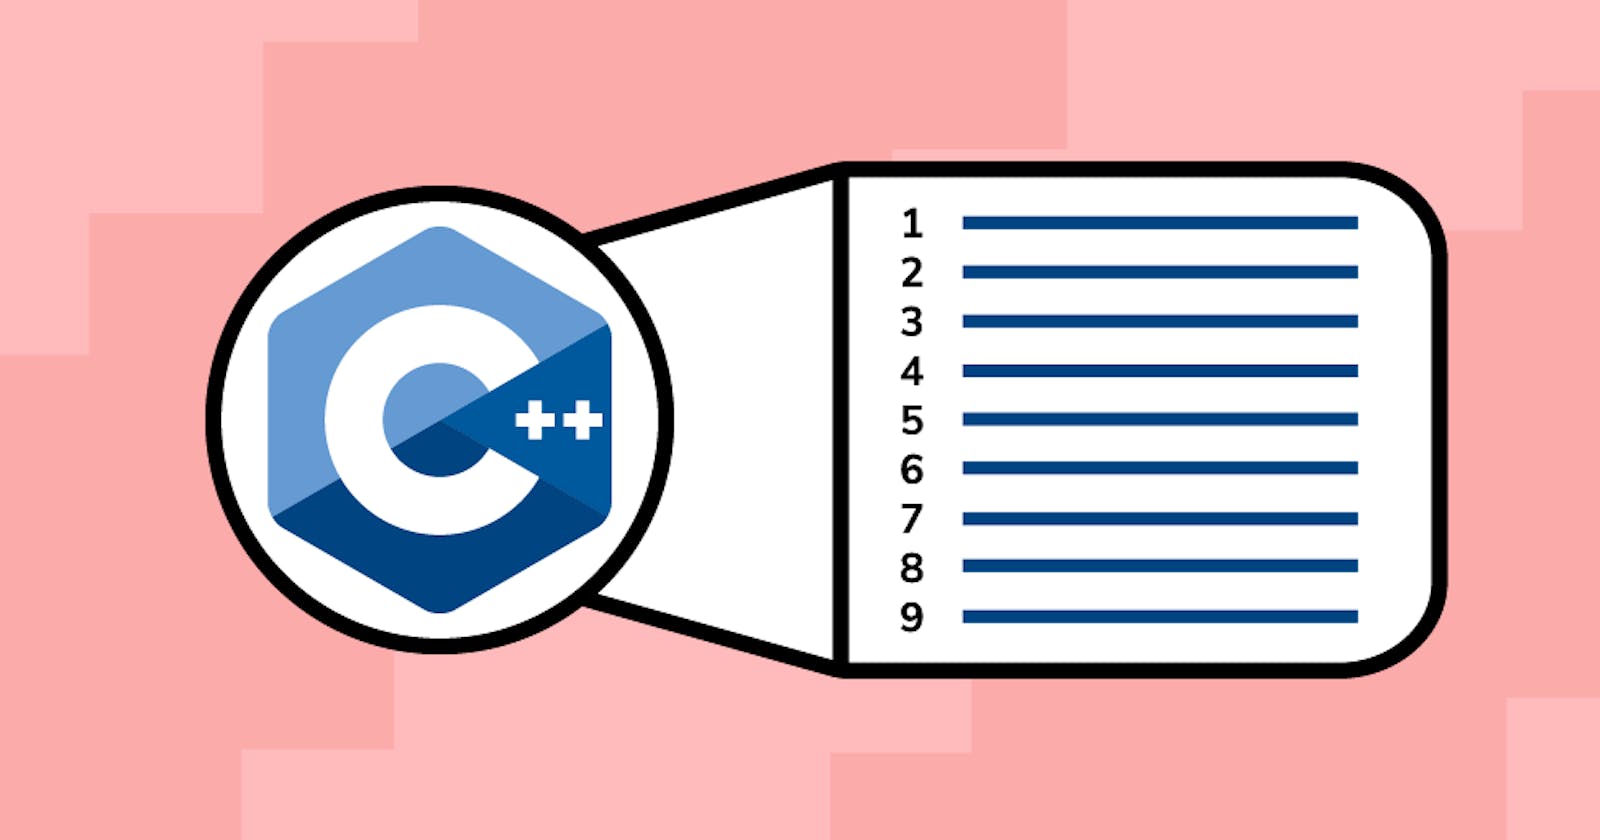 9 C++ statements to kick off your C++ programming journey